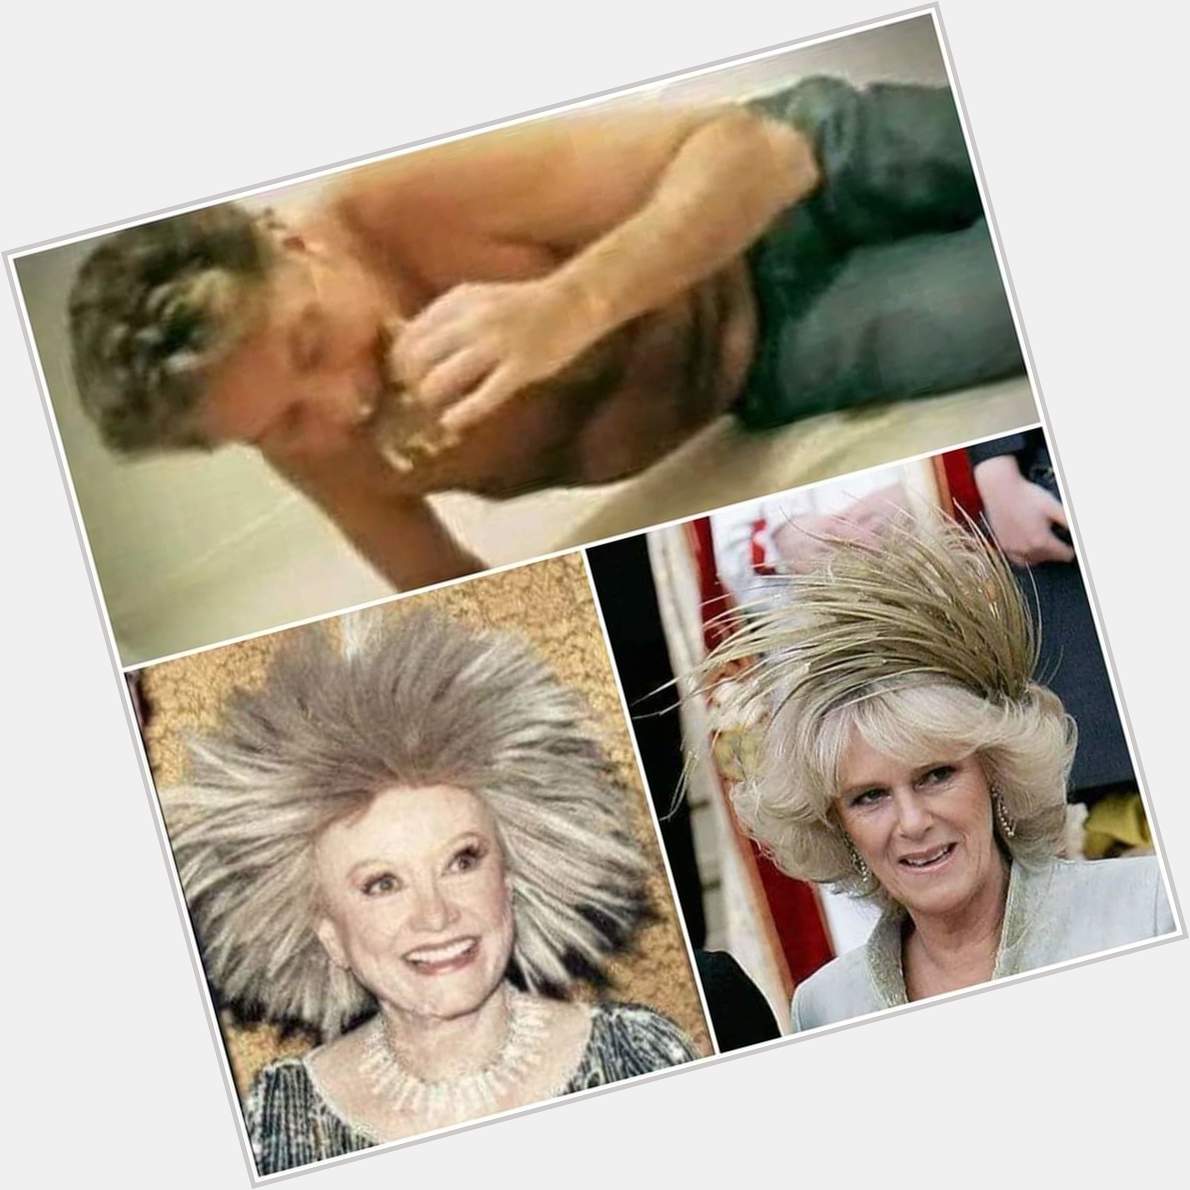 Happy Birthday to David Hasselhoff, Phyllis Diller, and Camilla Parker Bowles! 